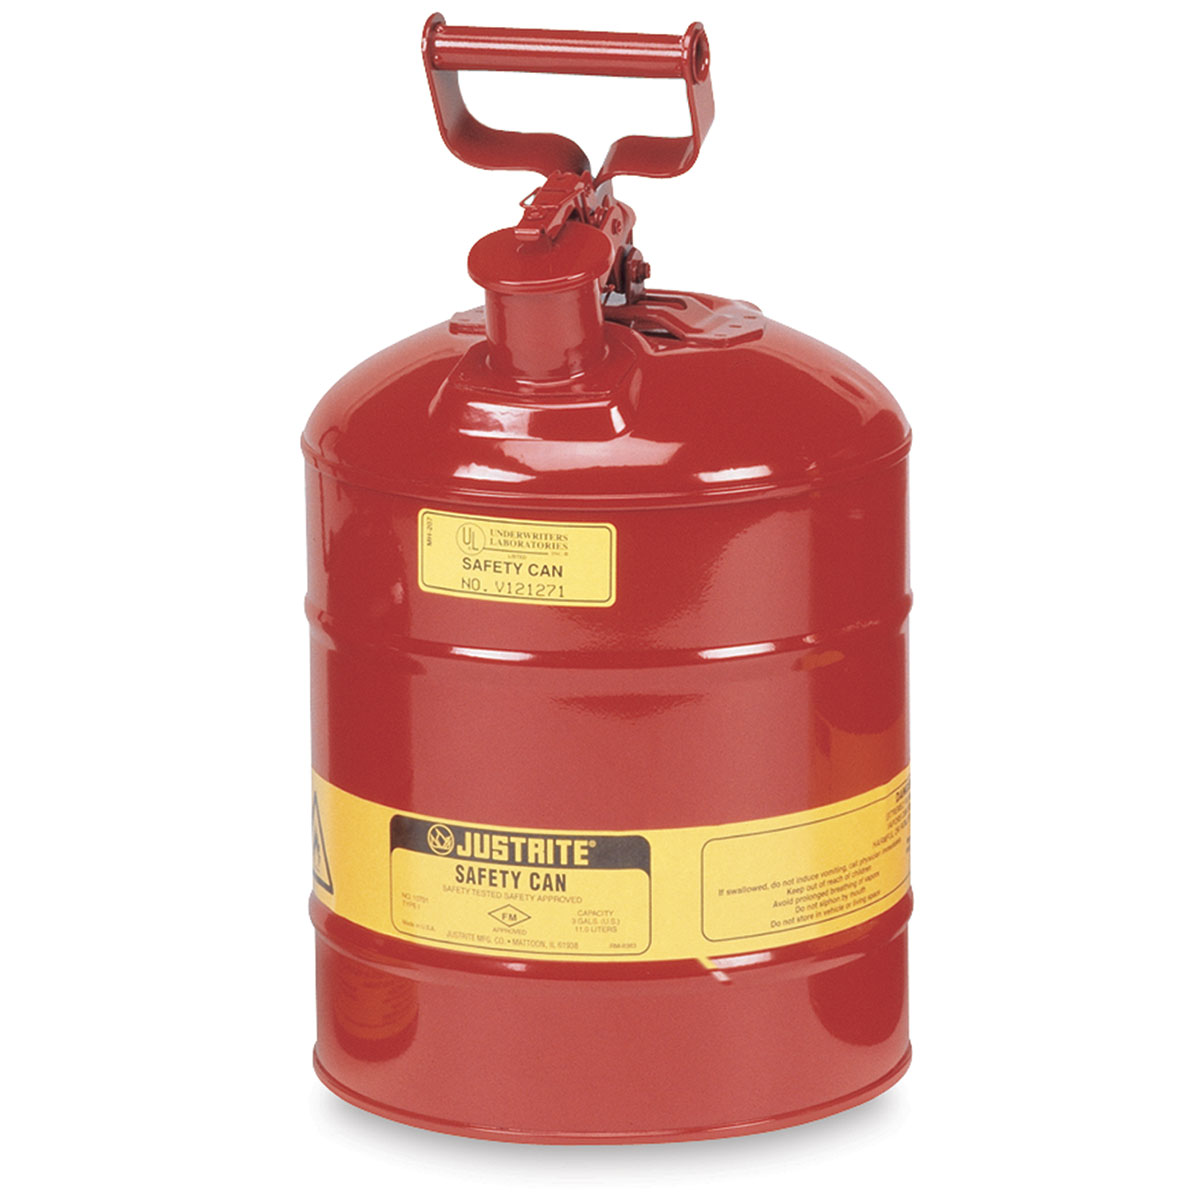 Justrite Type I Safety Can - Gallon